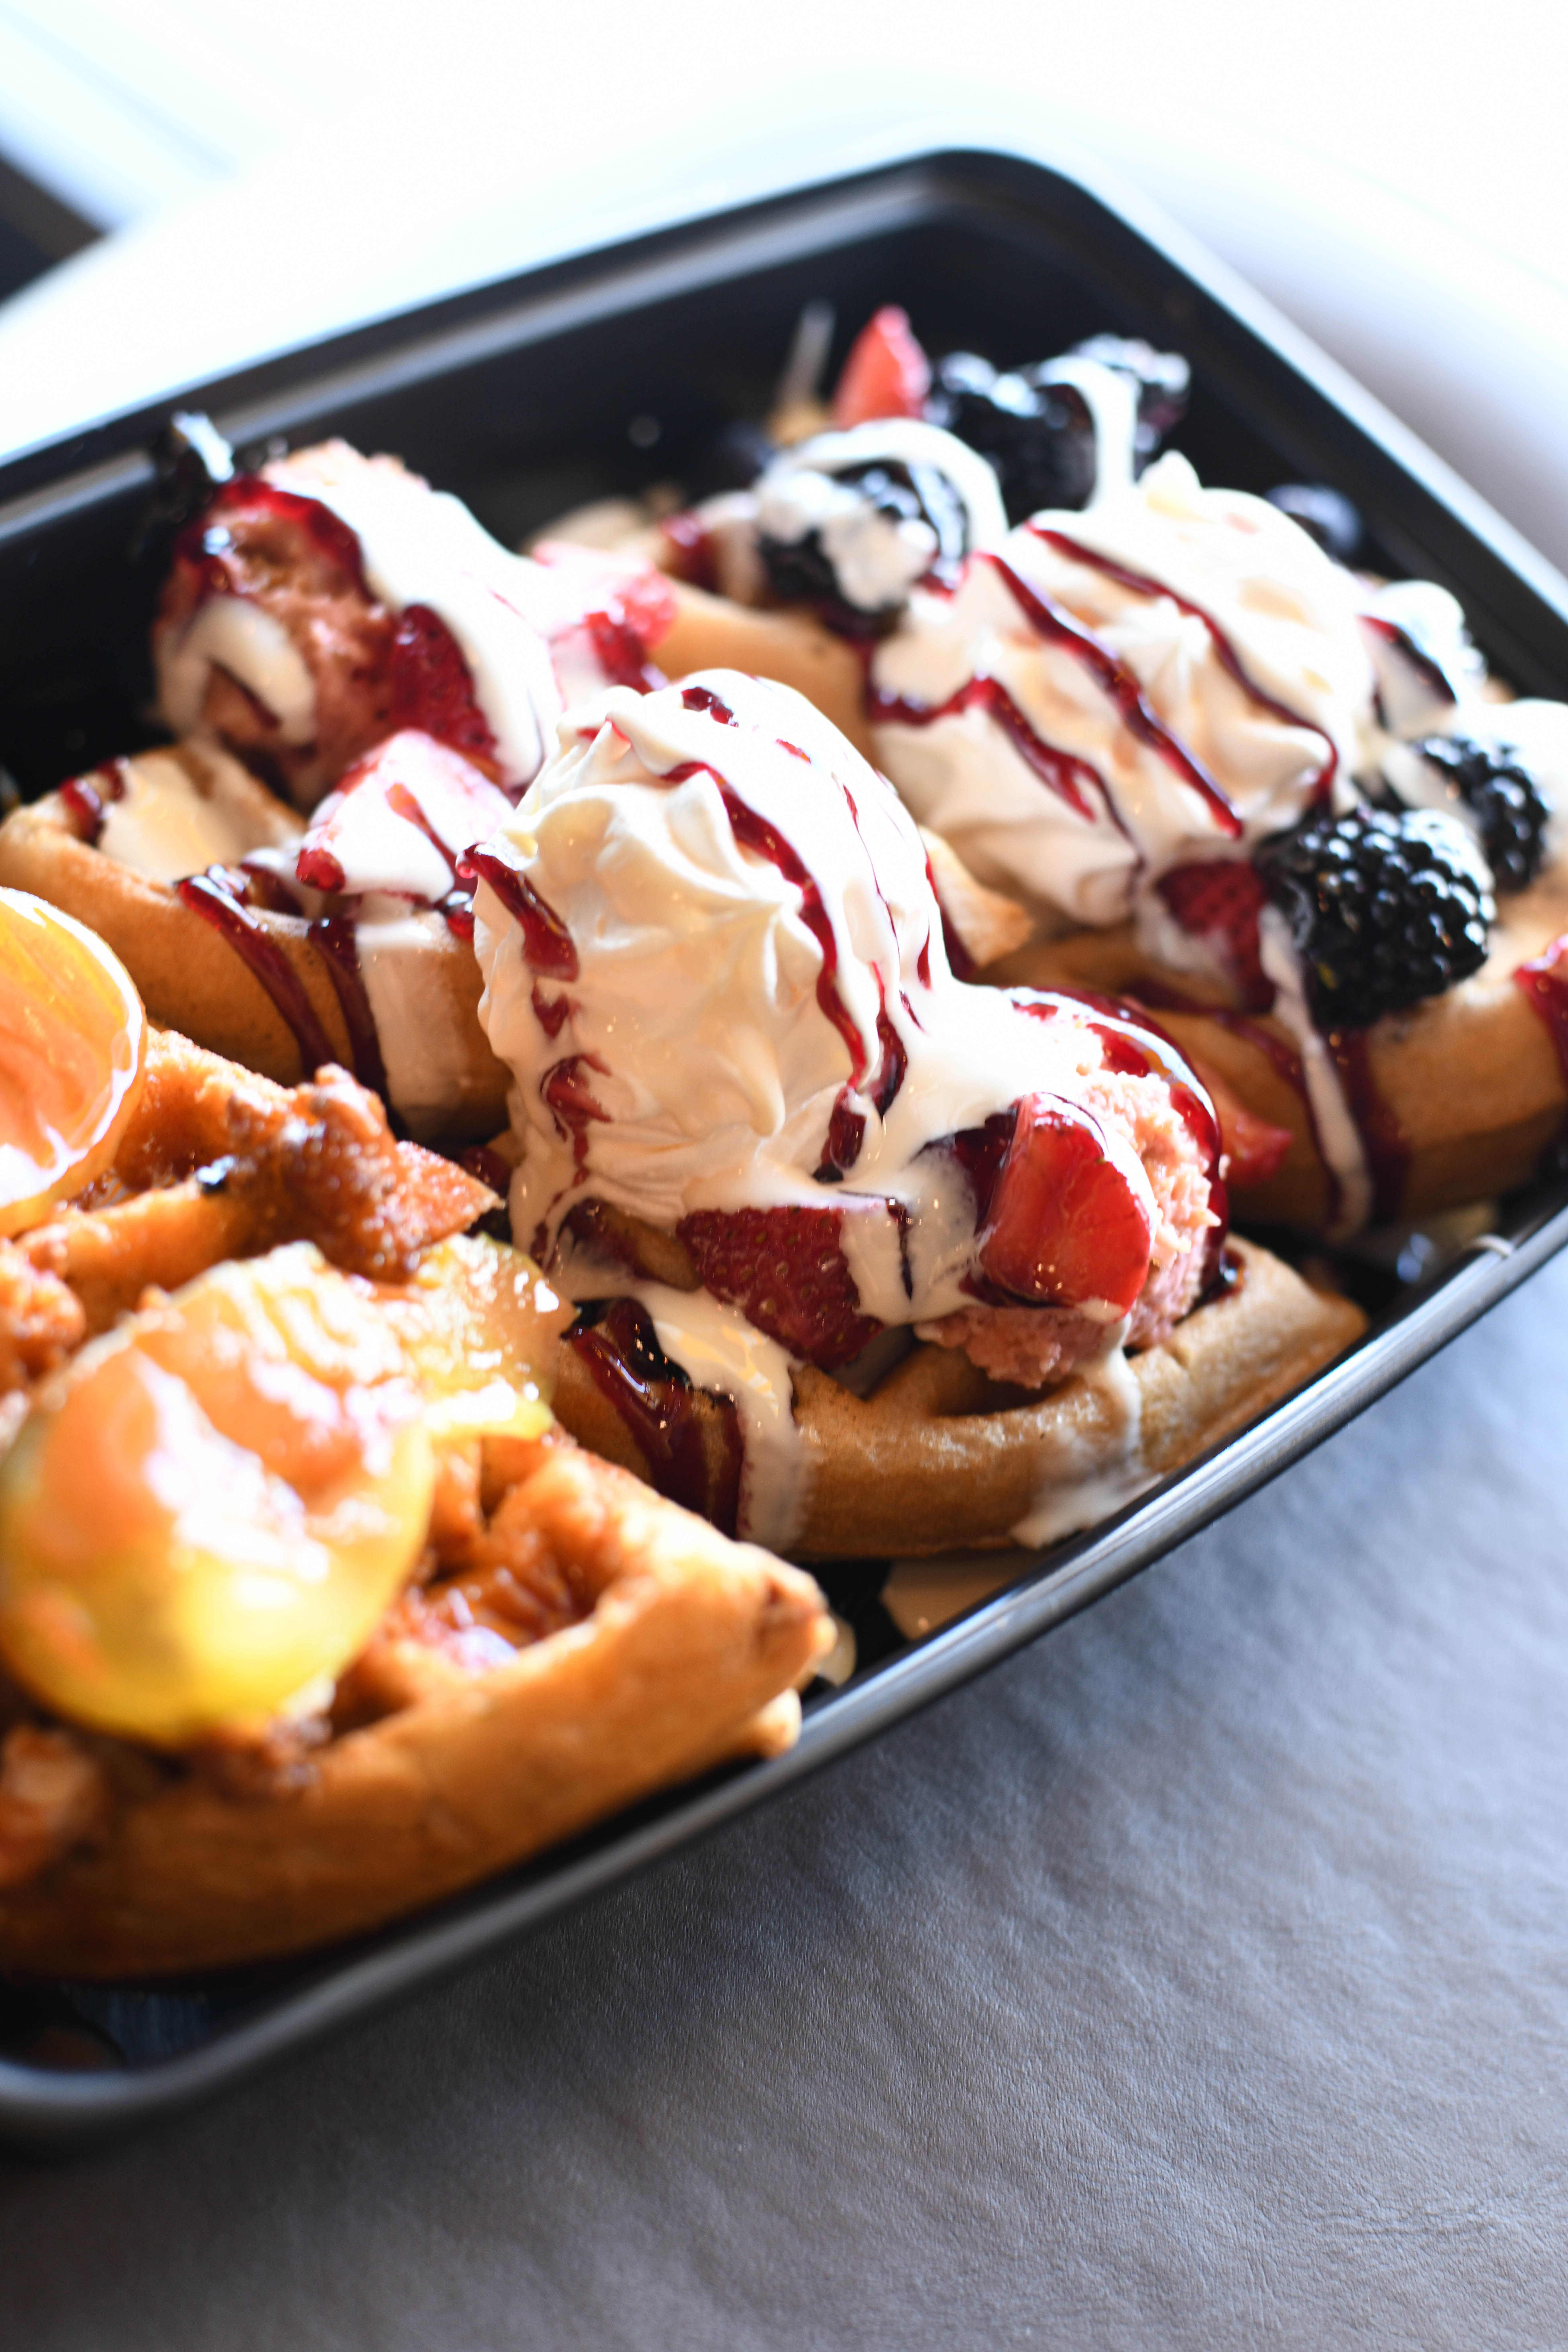 A flight of mini waffles topped with berries and fruit and cream from Waffle Cafe in Detroit, Michigan.